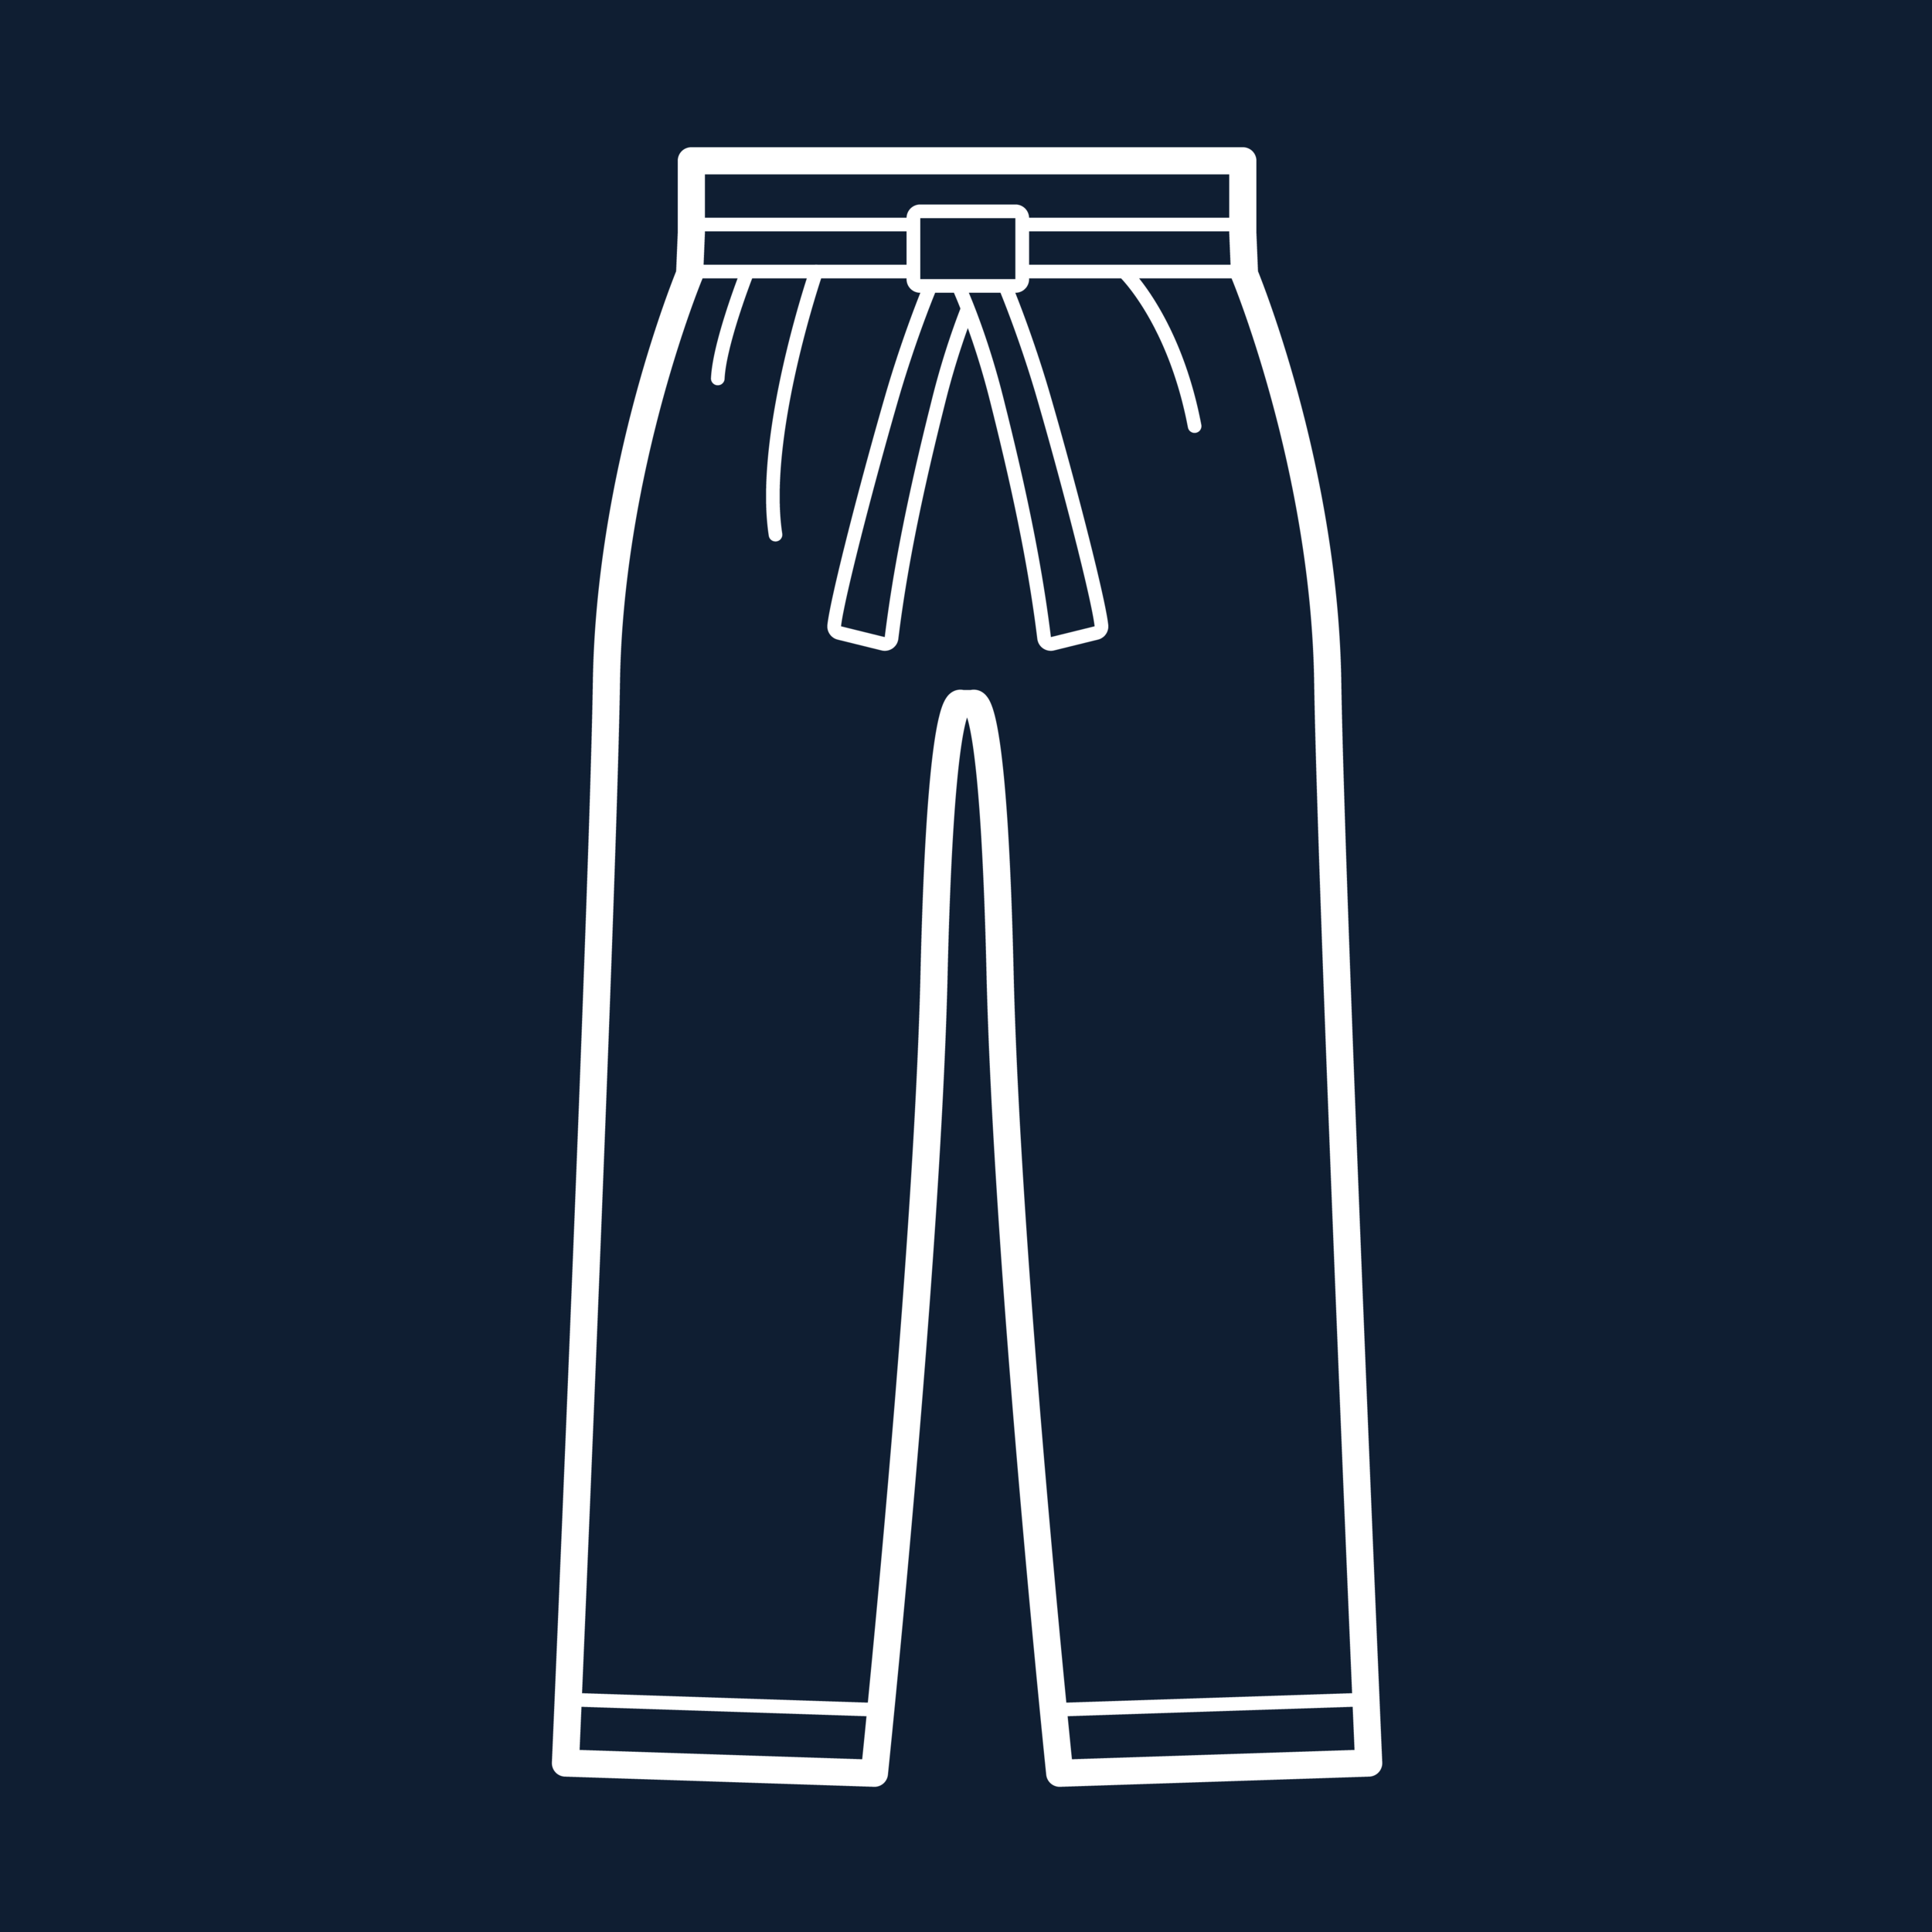 How to Make a Pair of Pants